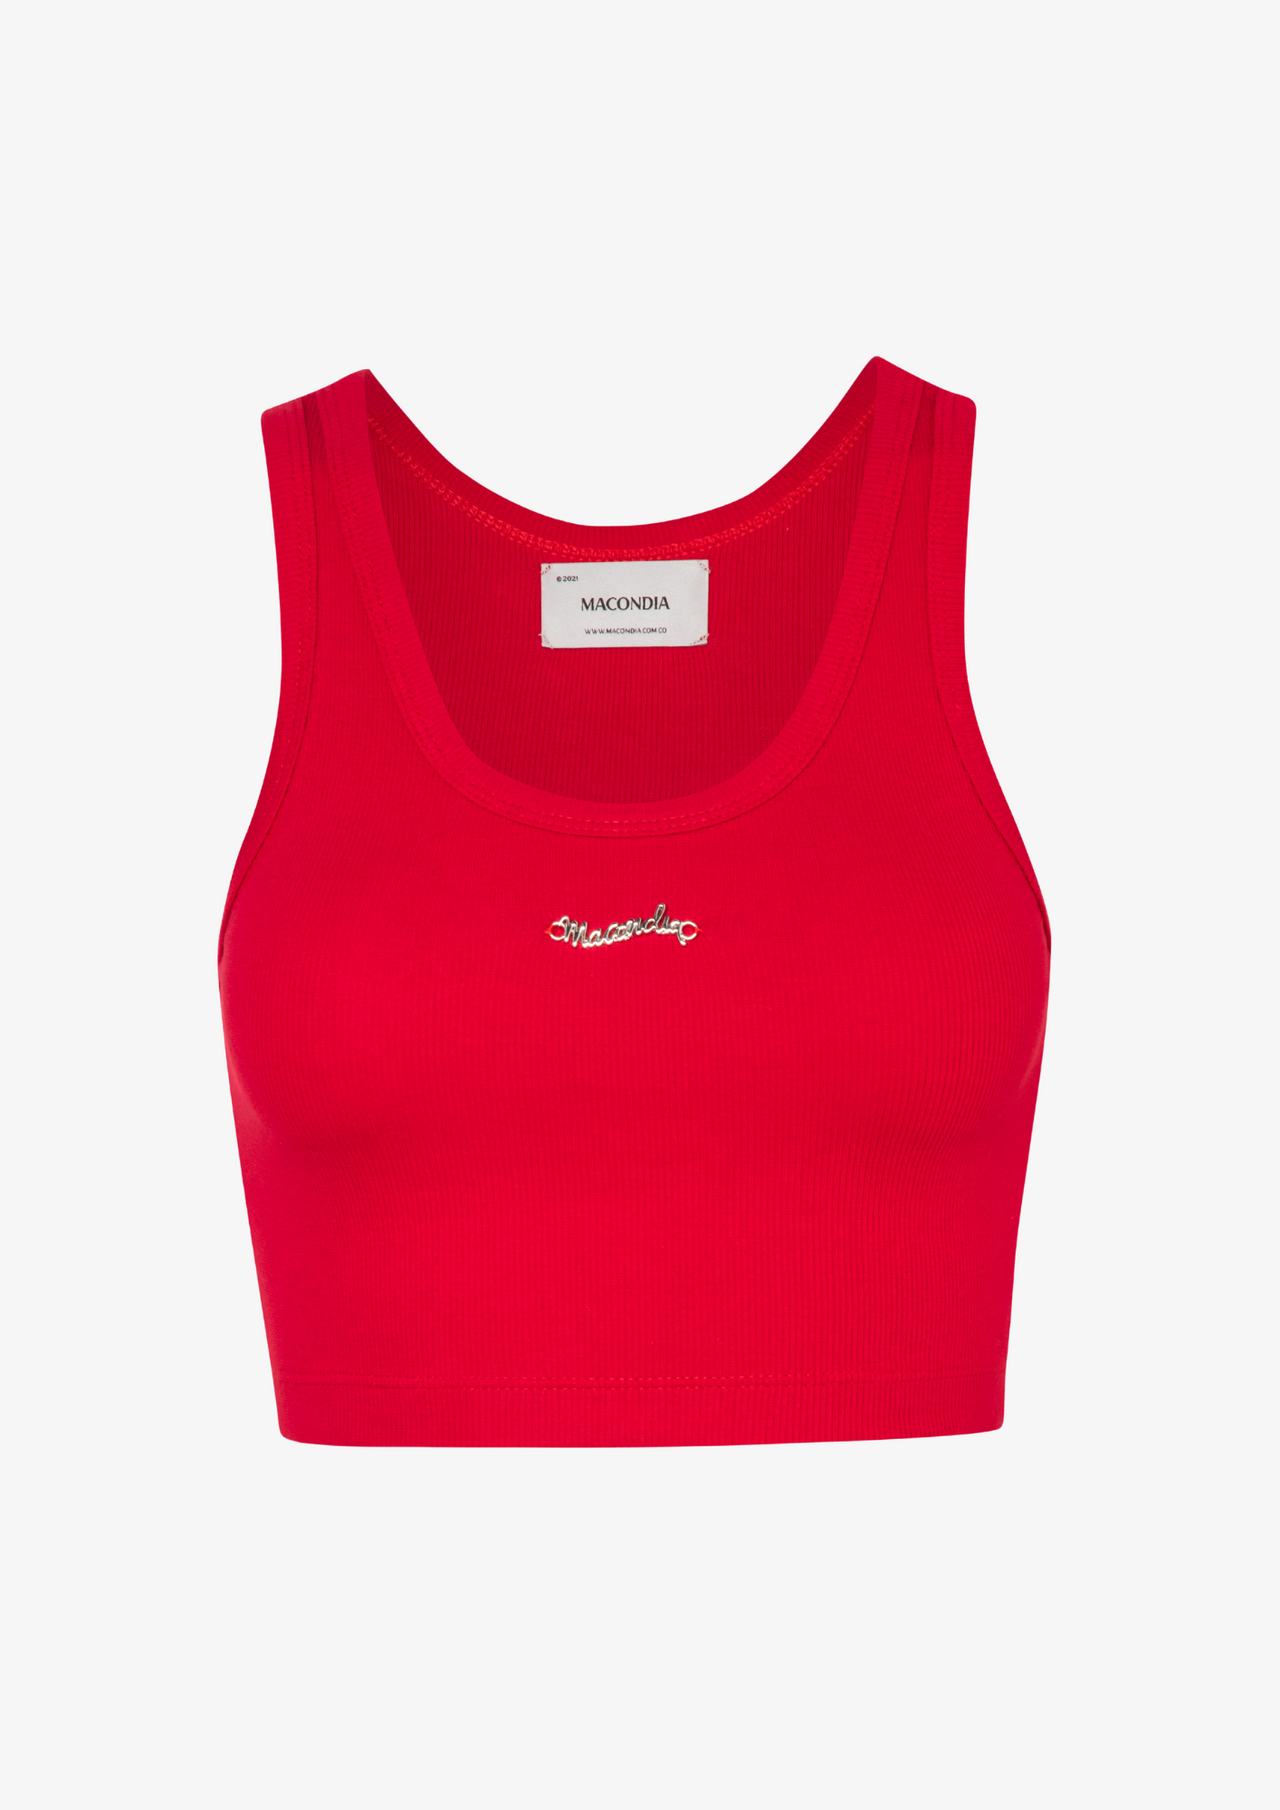 Heavyweight Red Cotton Top